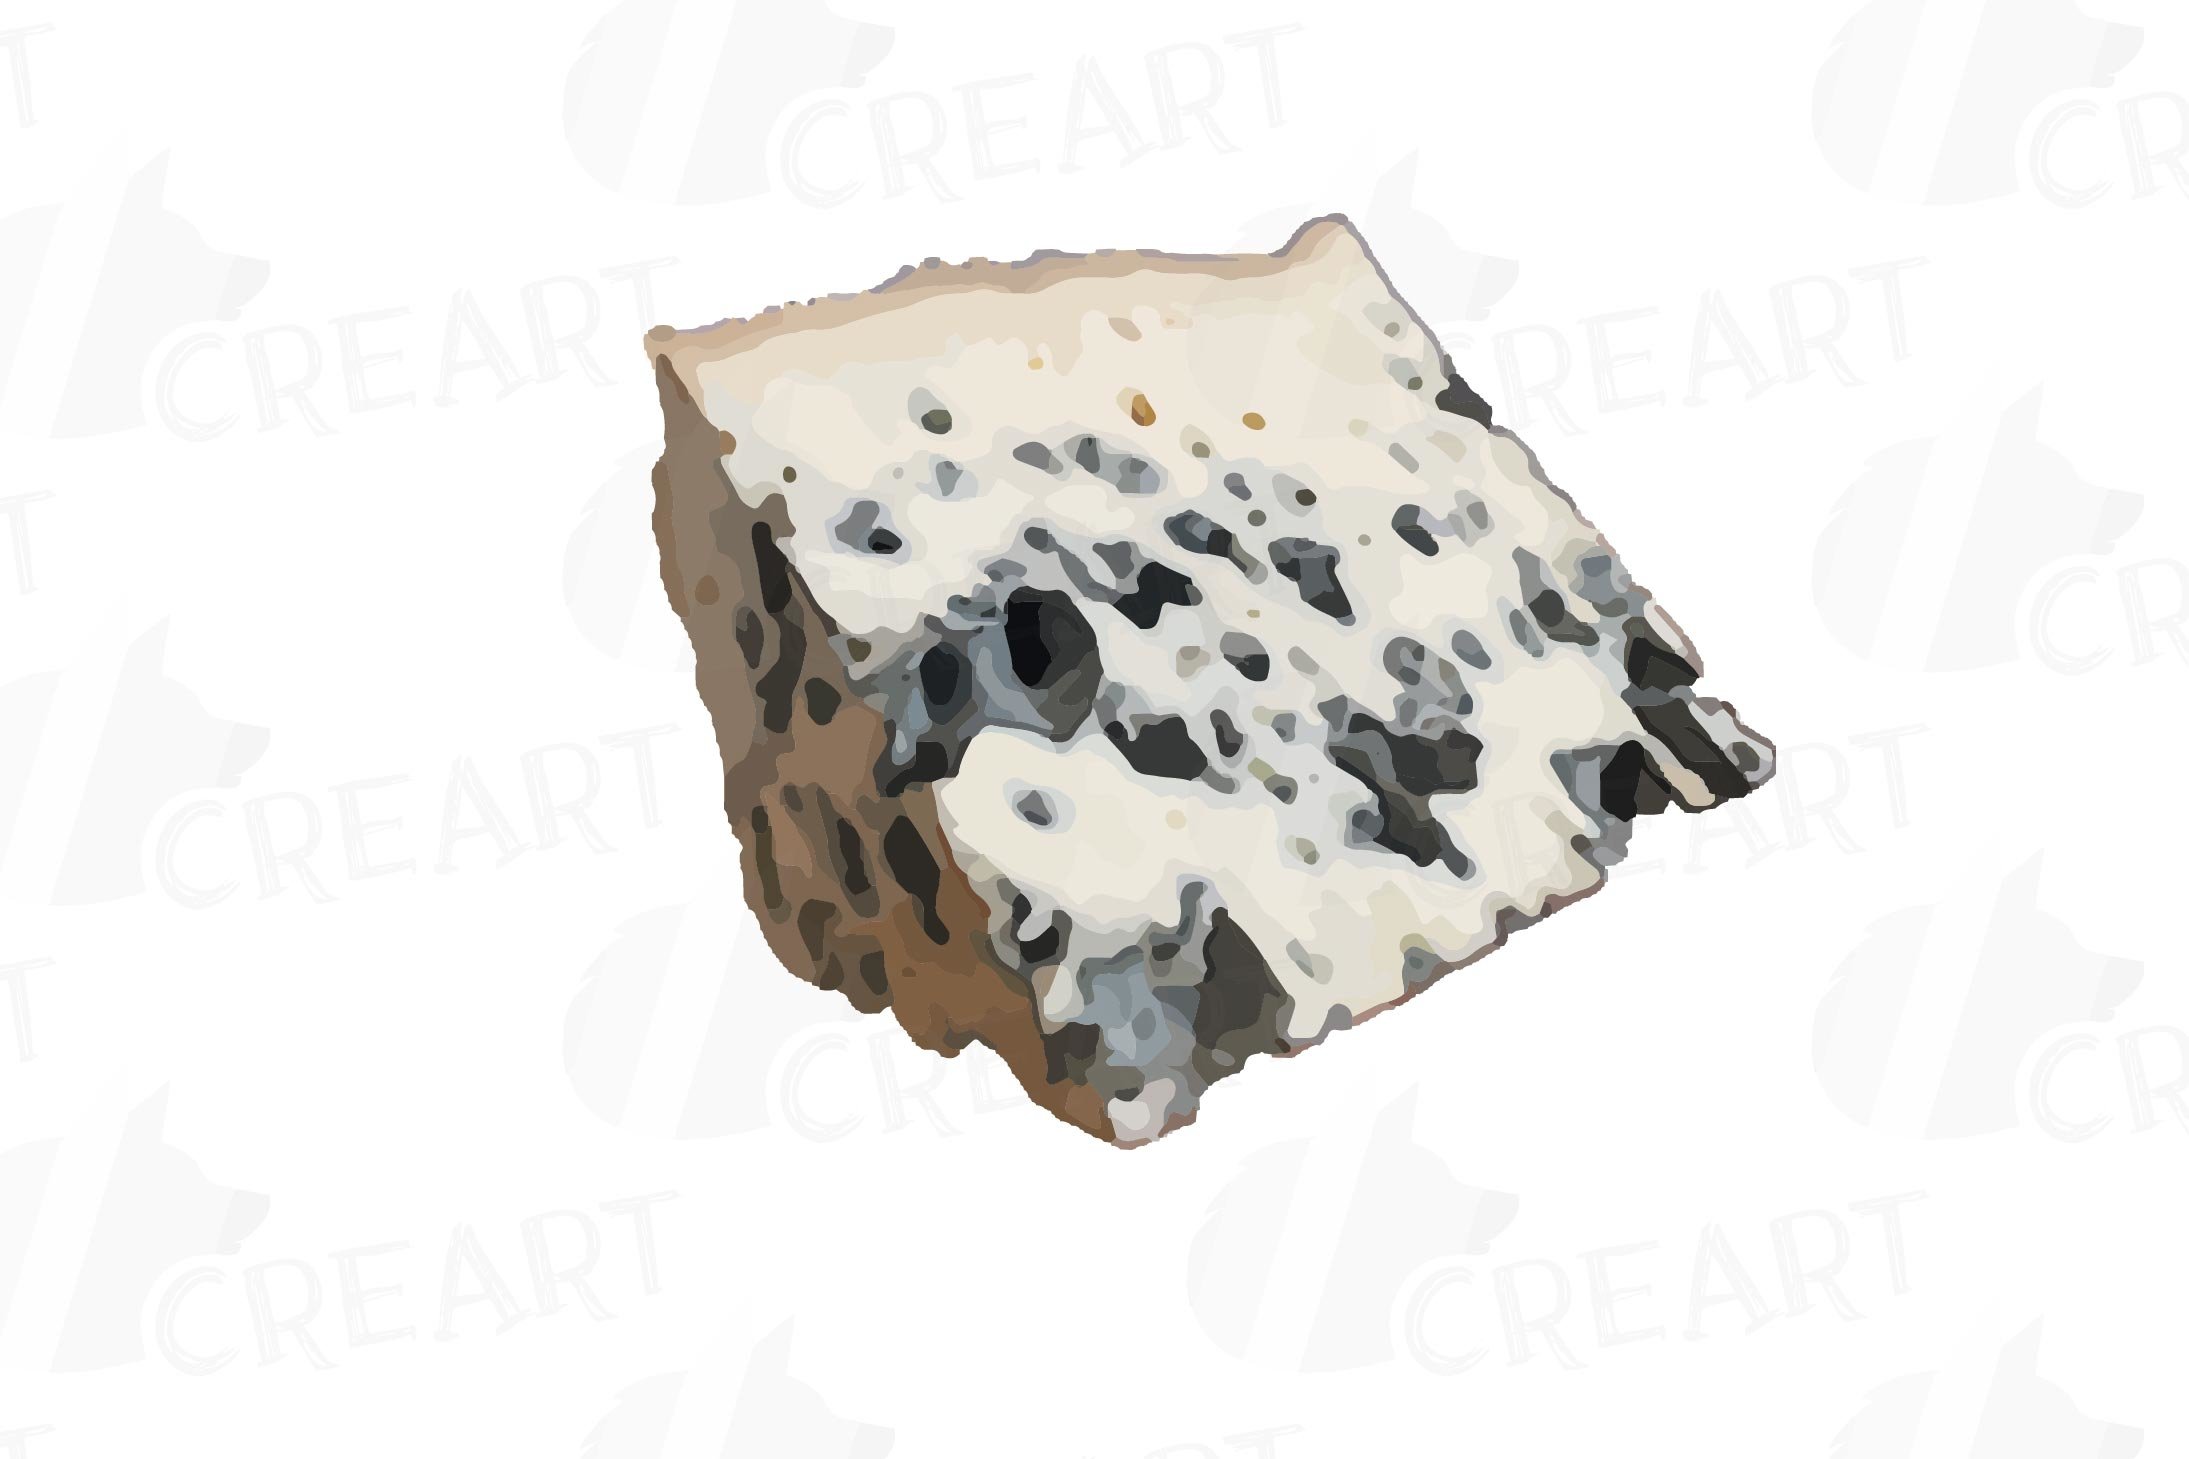 Gorgeous image of blue cheese isolated on white background.